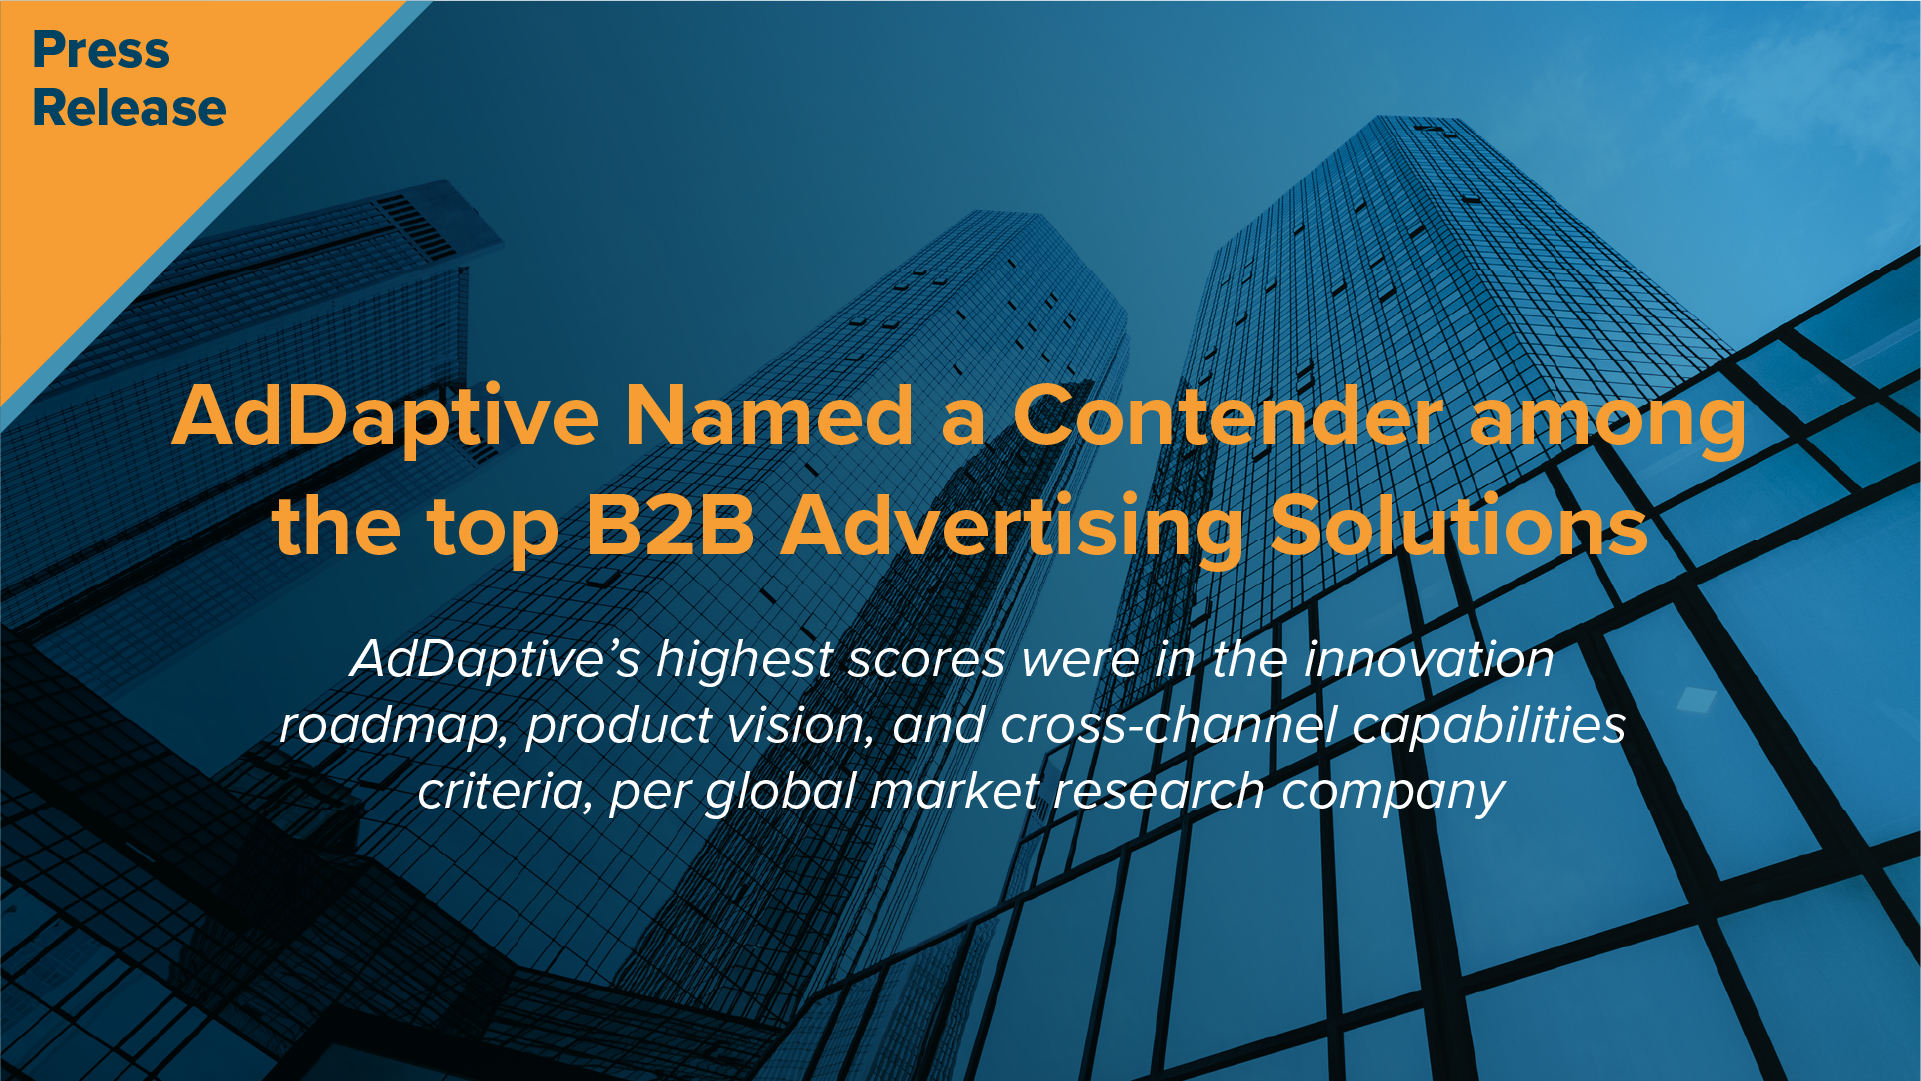 [PRESS RELEASE] AdDaptive Named a Contender among the top B2B Advertising Solutions